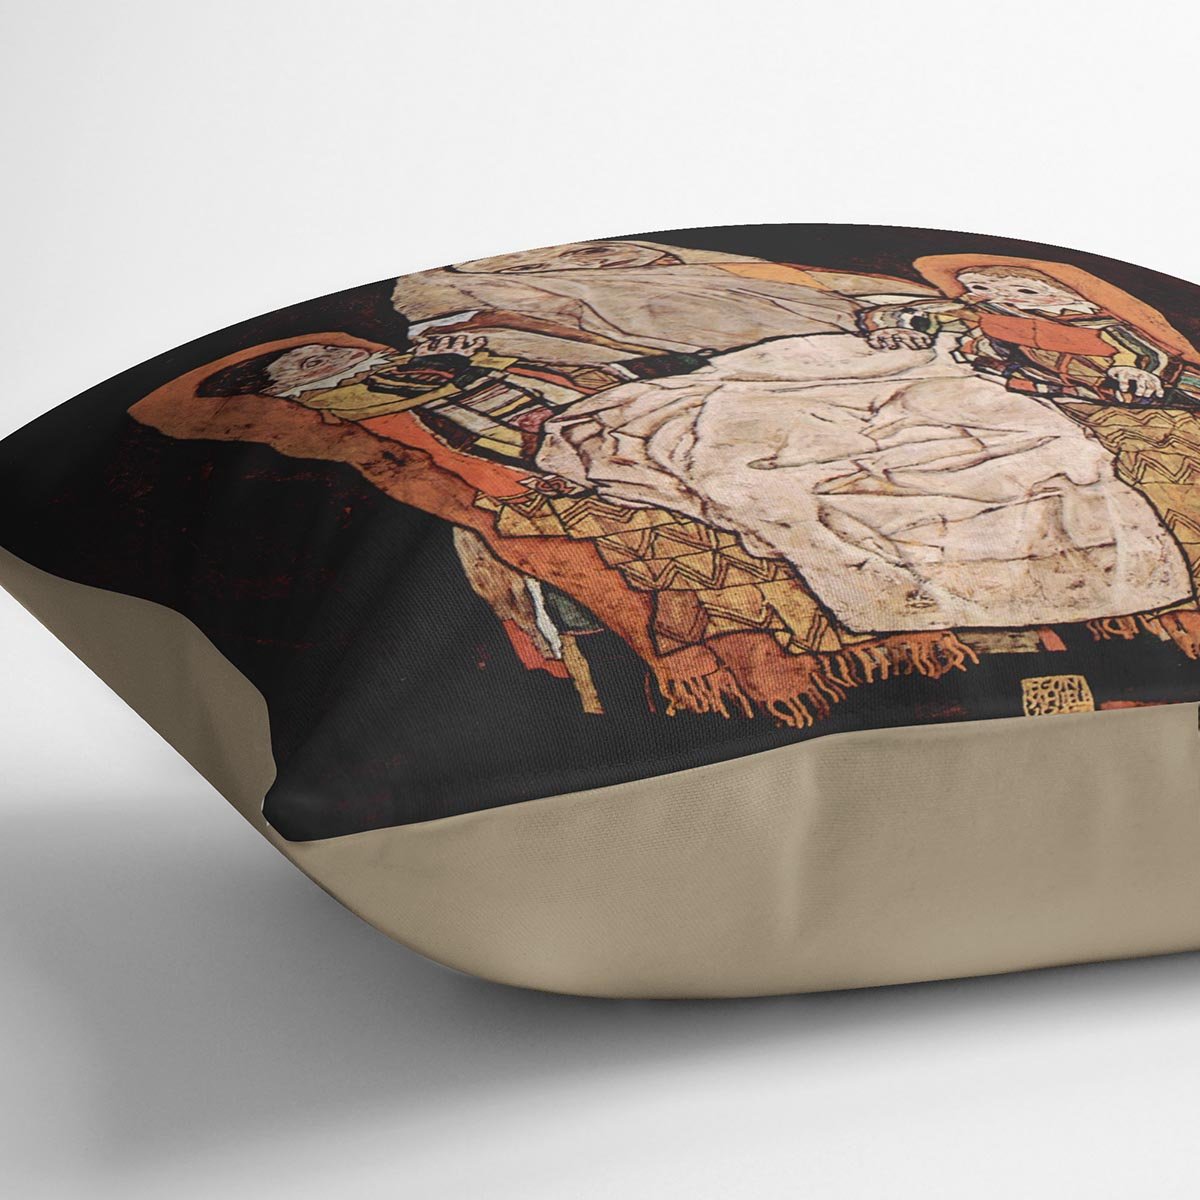 Parent with two children the mother by Egon Schiele Cushion